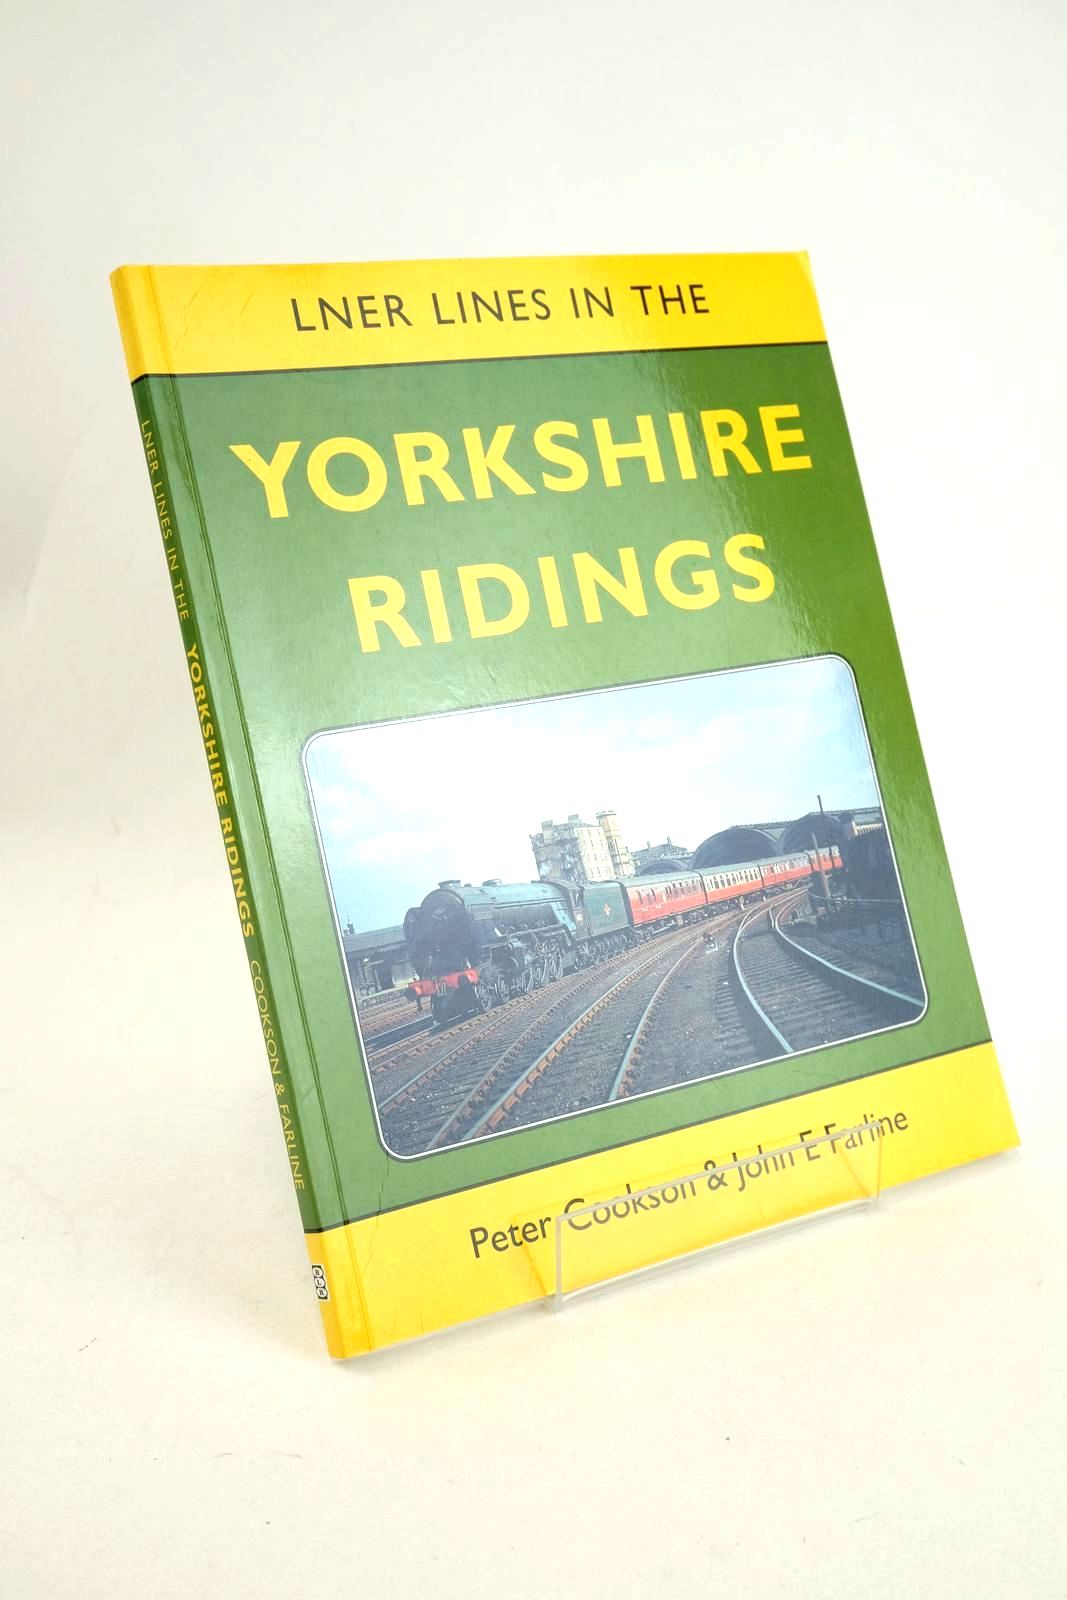 Photo of LNER LINES IN THE YORKSHIRE RIDINGS written by Cookson, Peter Fairline, John E. published by Book Law Publications, Railbus Publications (STOCK CODE: 1327233)  for sale by Stella & Rose's Books